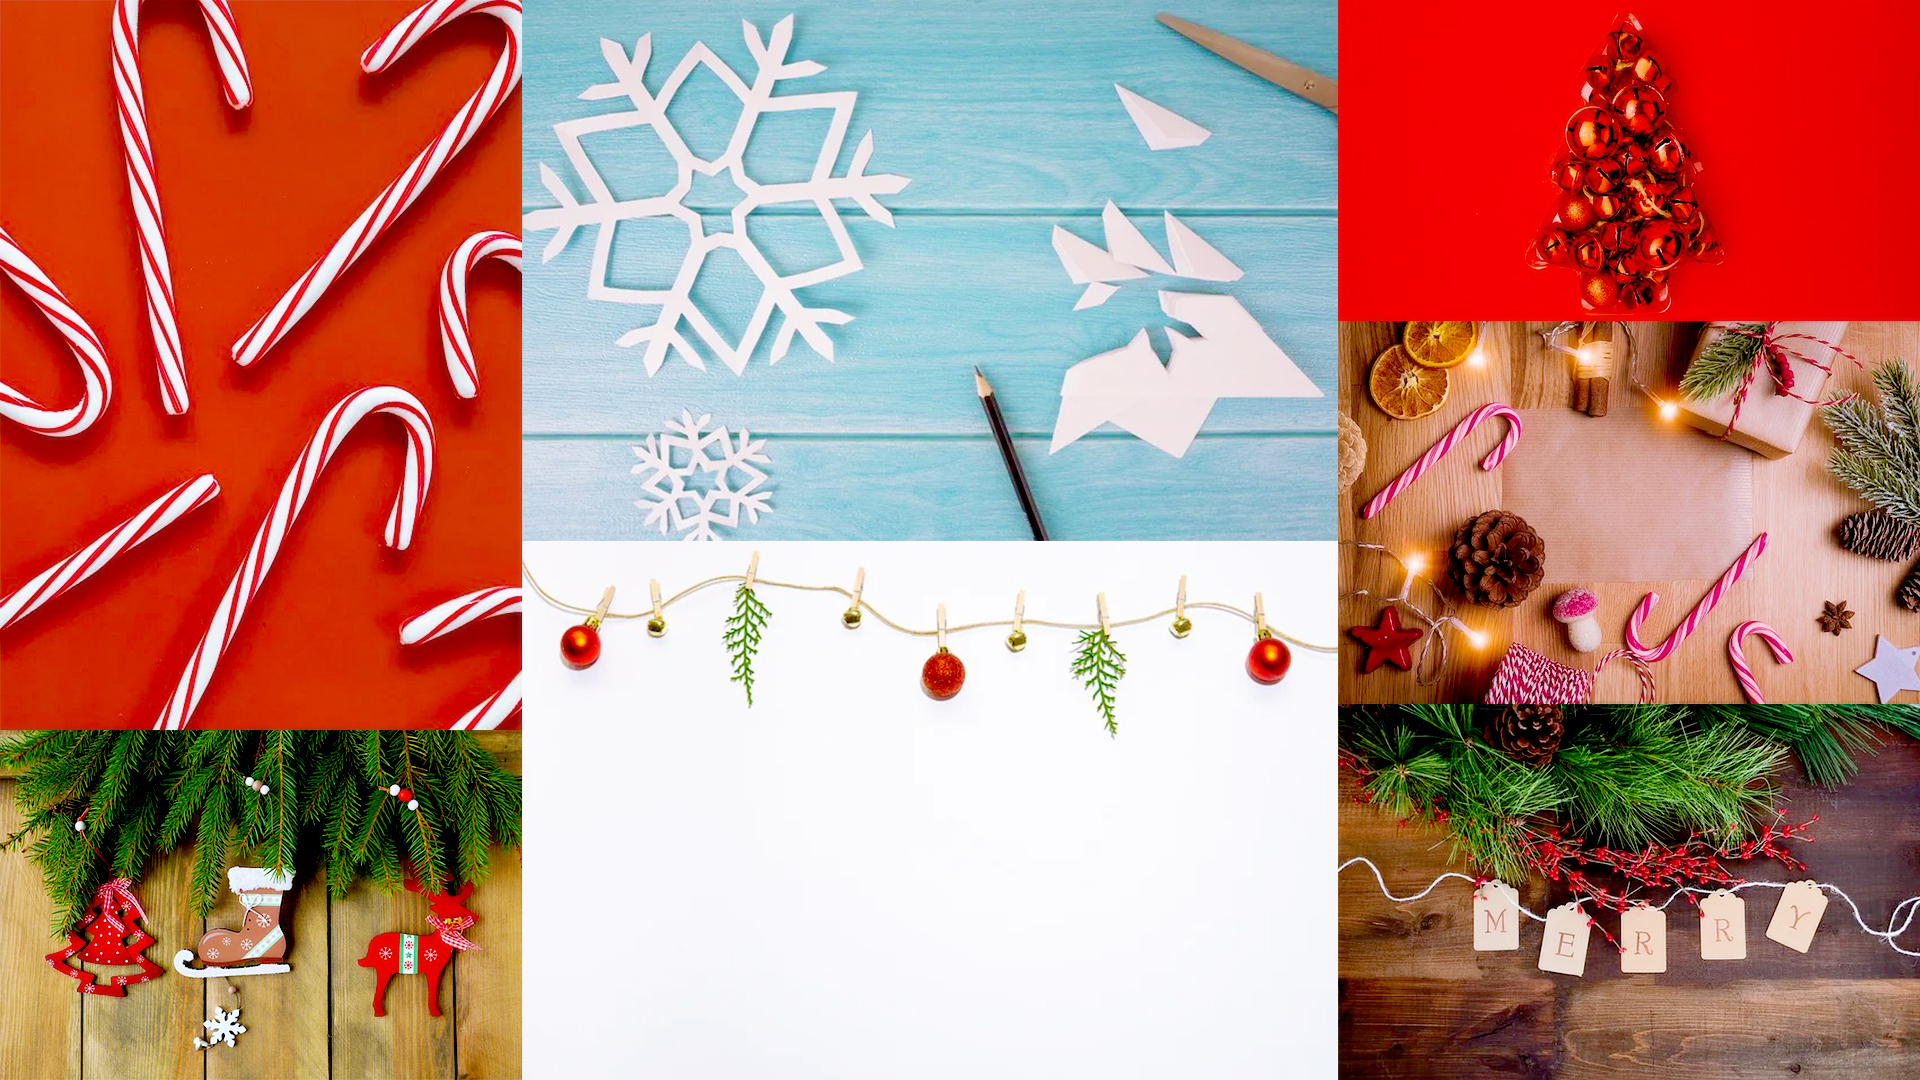 Christmas Flat Lay Photography Embrace Your Christmas Creativity With This 16 Amazing Christmas Flat Lay Photography Ideas